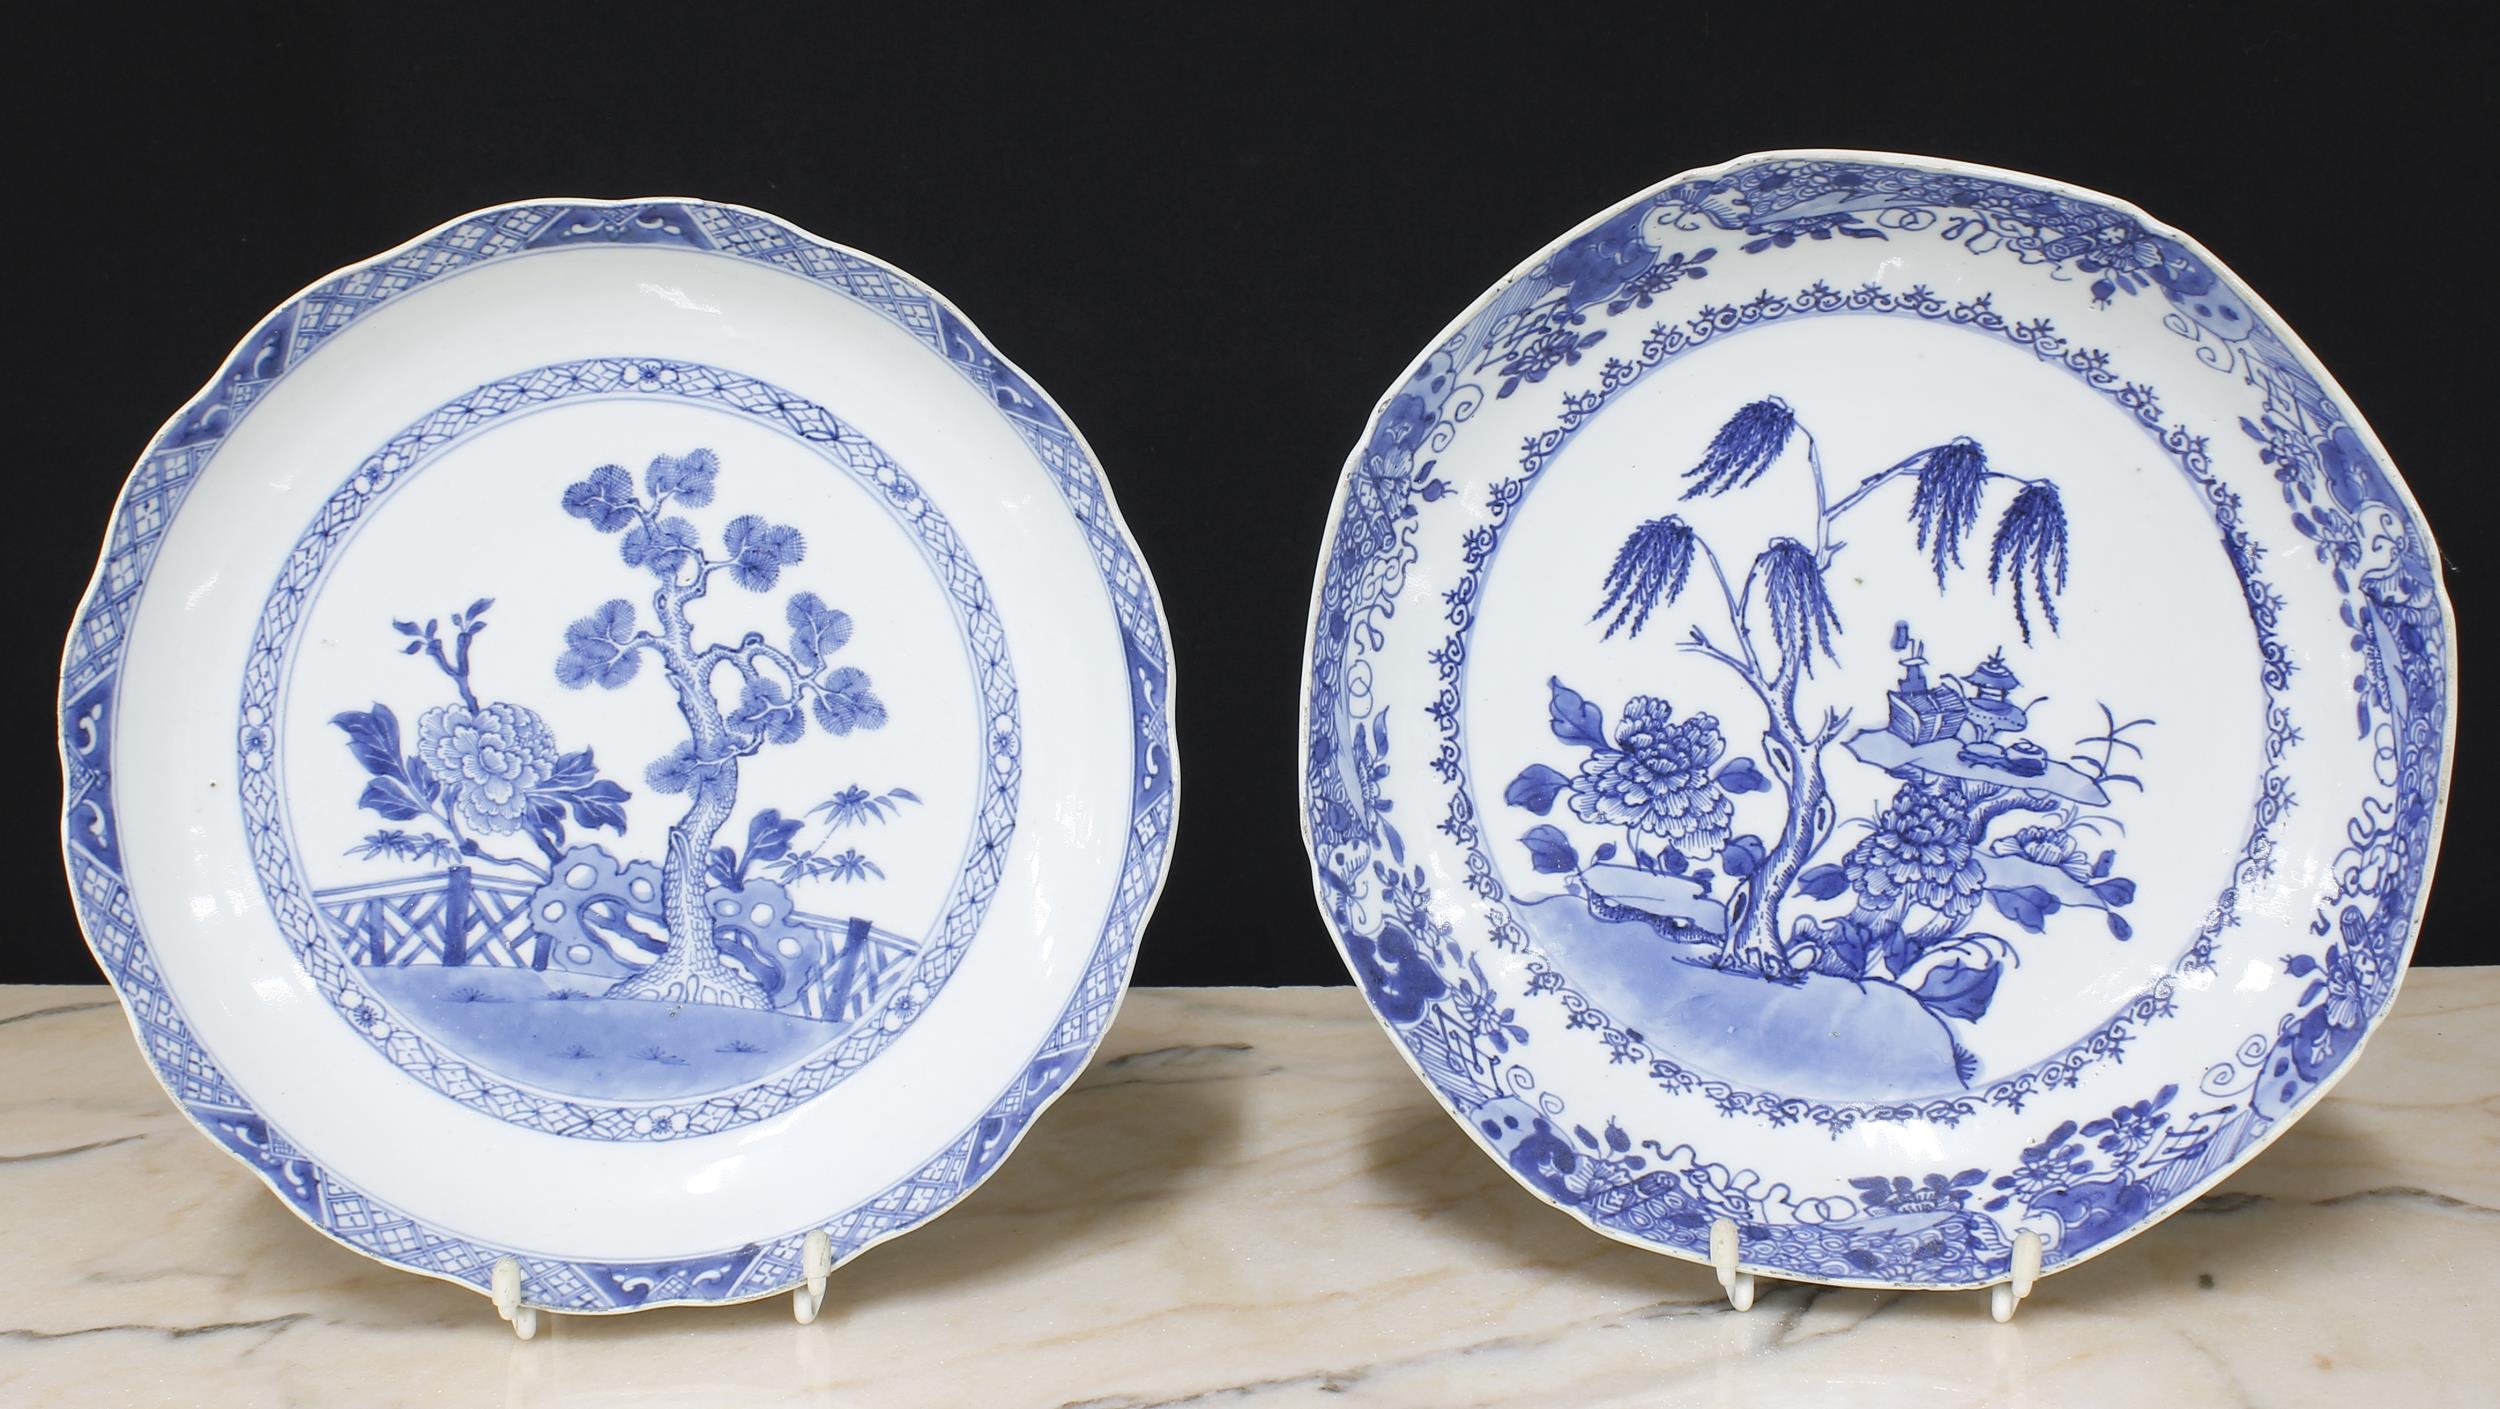 Pair of Chinese export blue and white porcelain circular plates, decorated with boats in a landscape